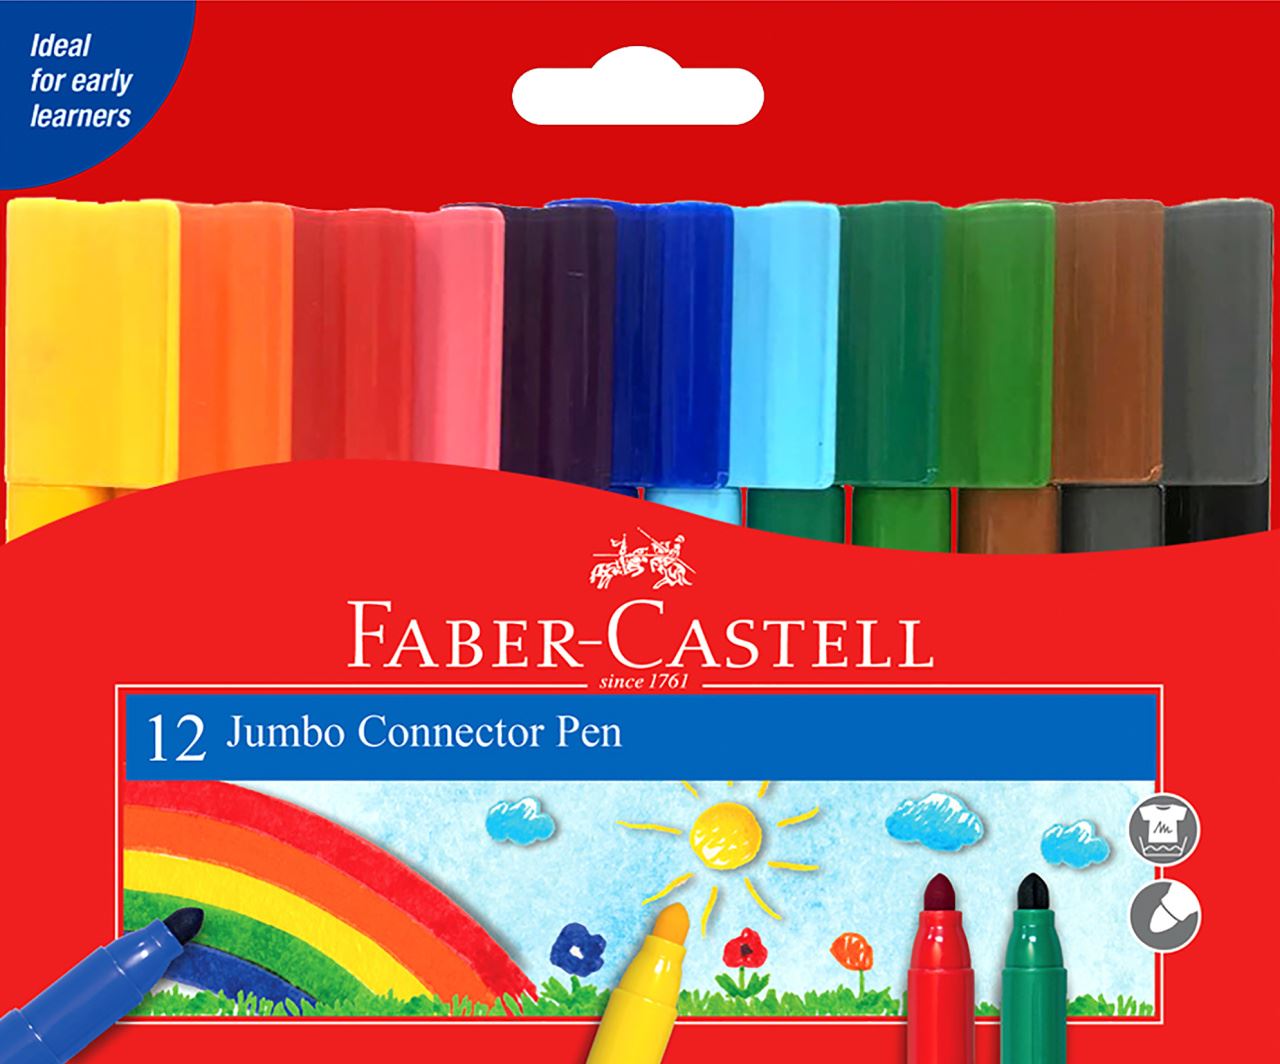 Faber-Castell - Connector Pen Jumbo box of 12